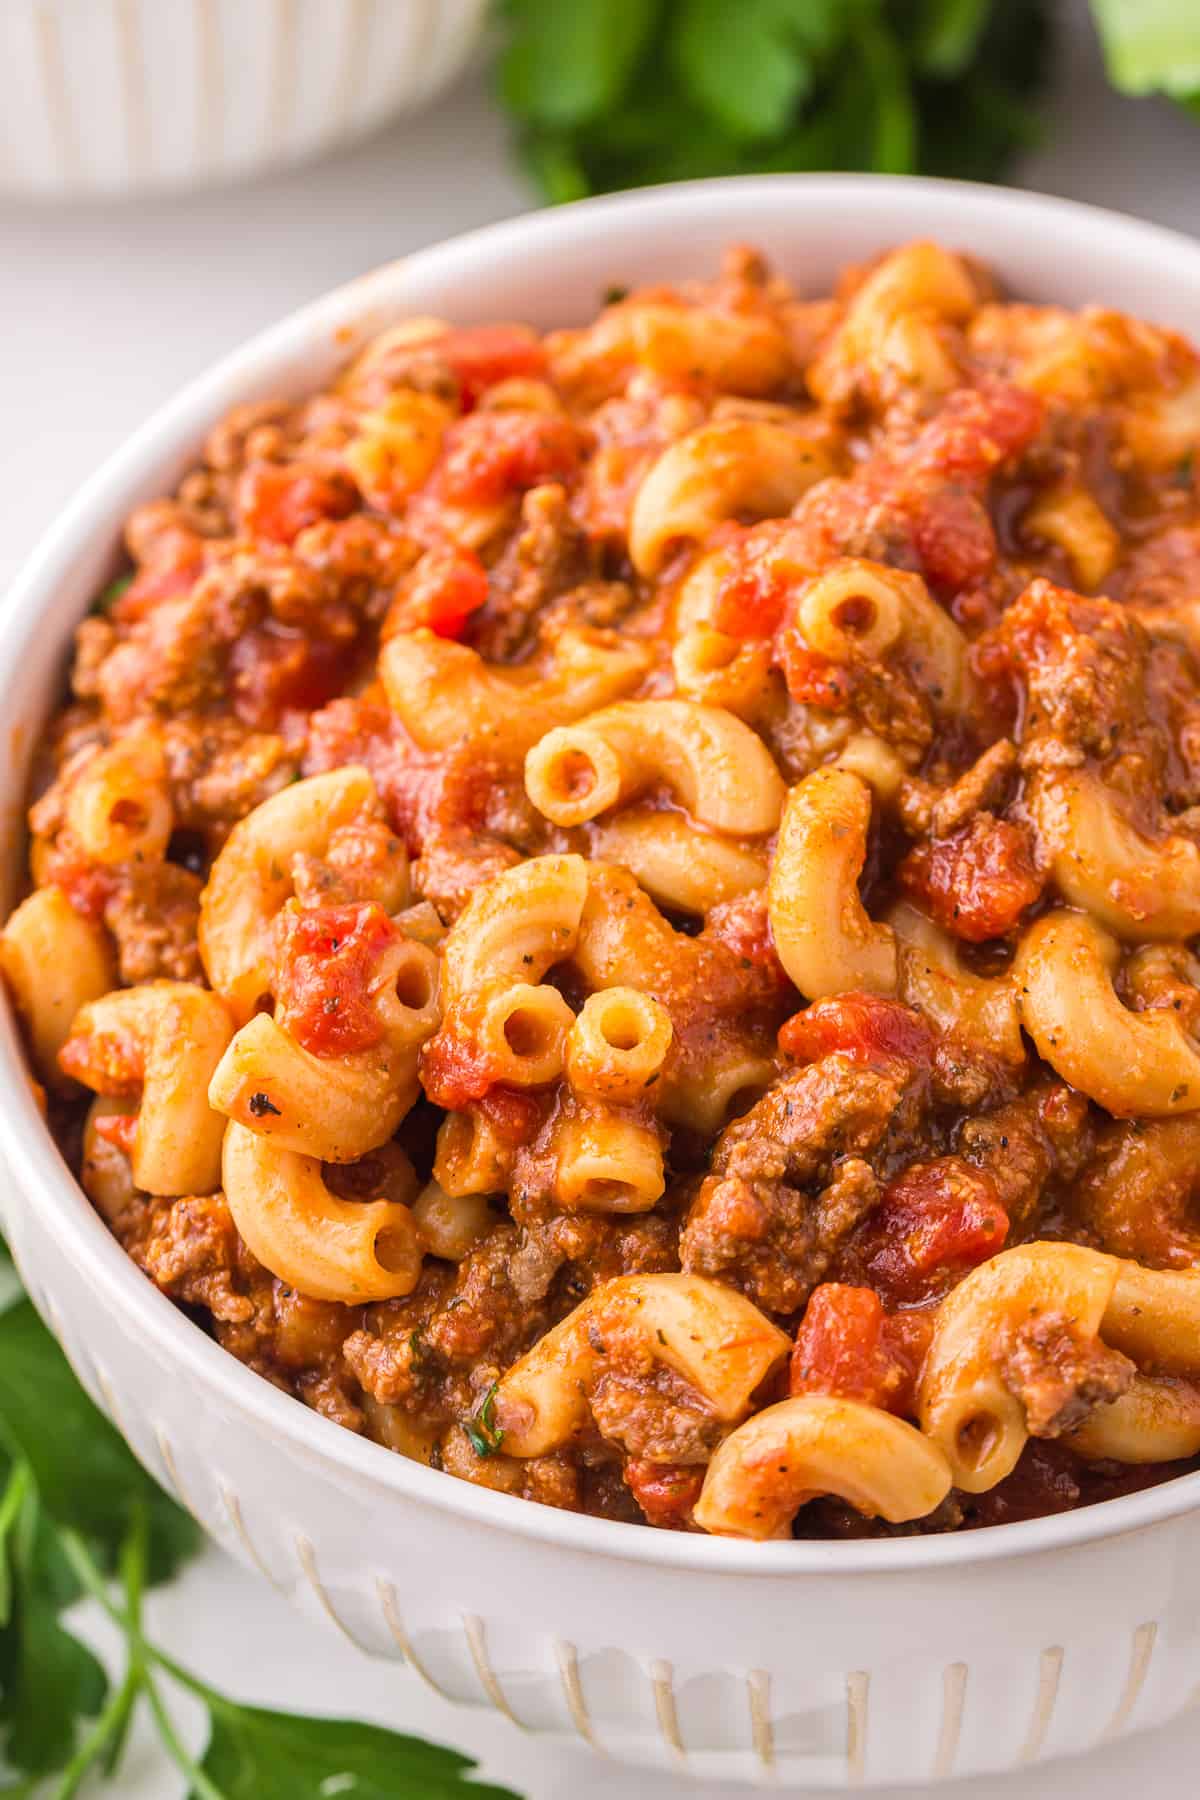 a bowl of goulash, filled with macaroni noodles, ground beef, and tomatoes.